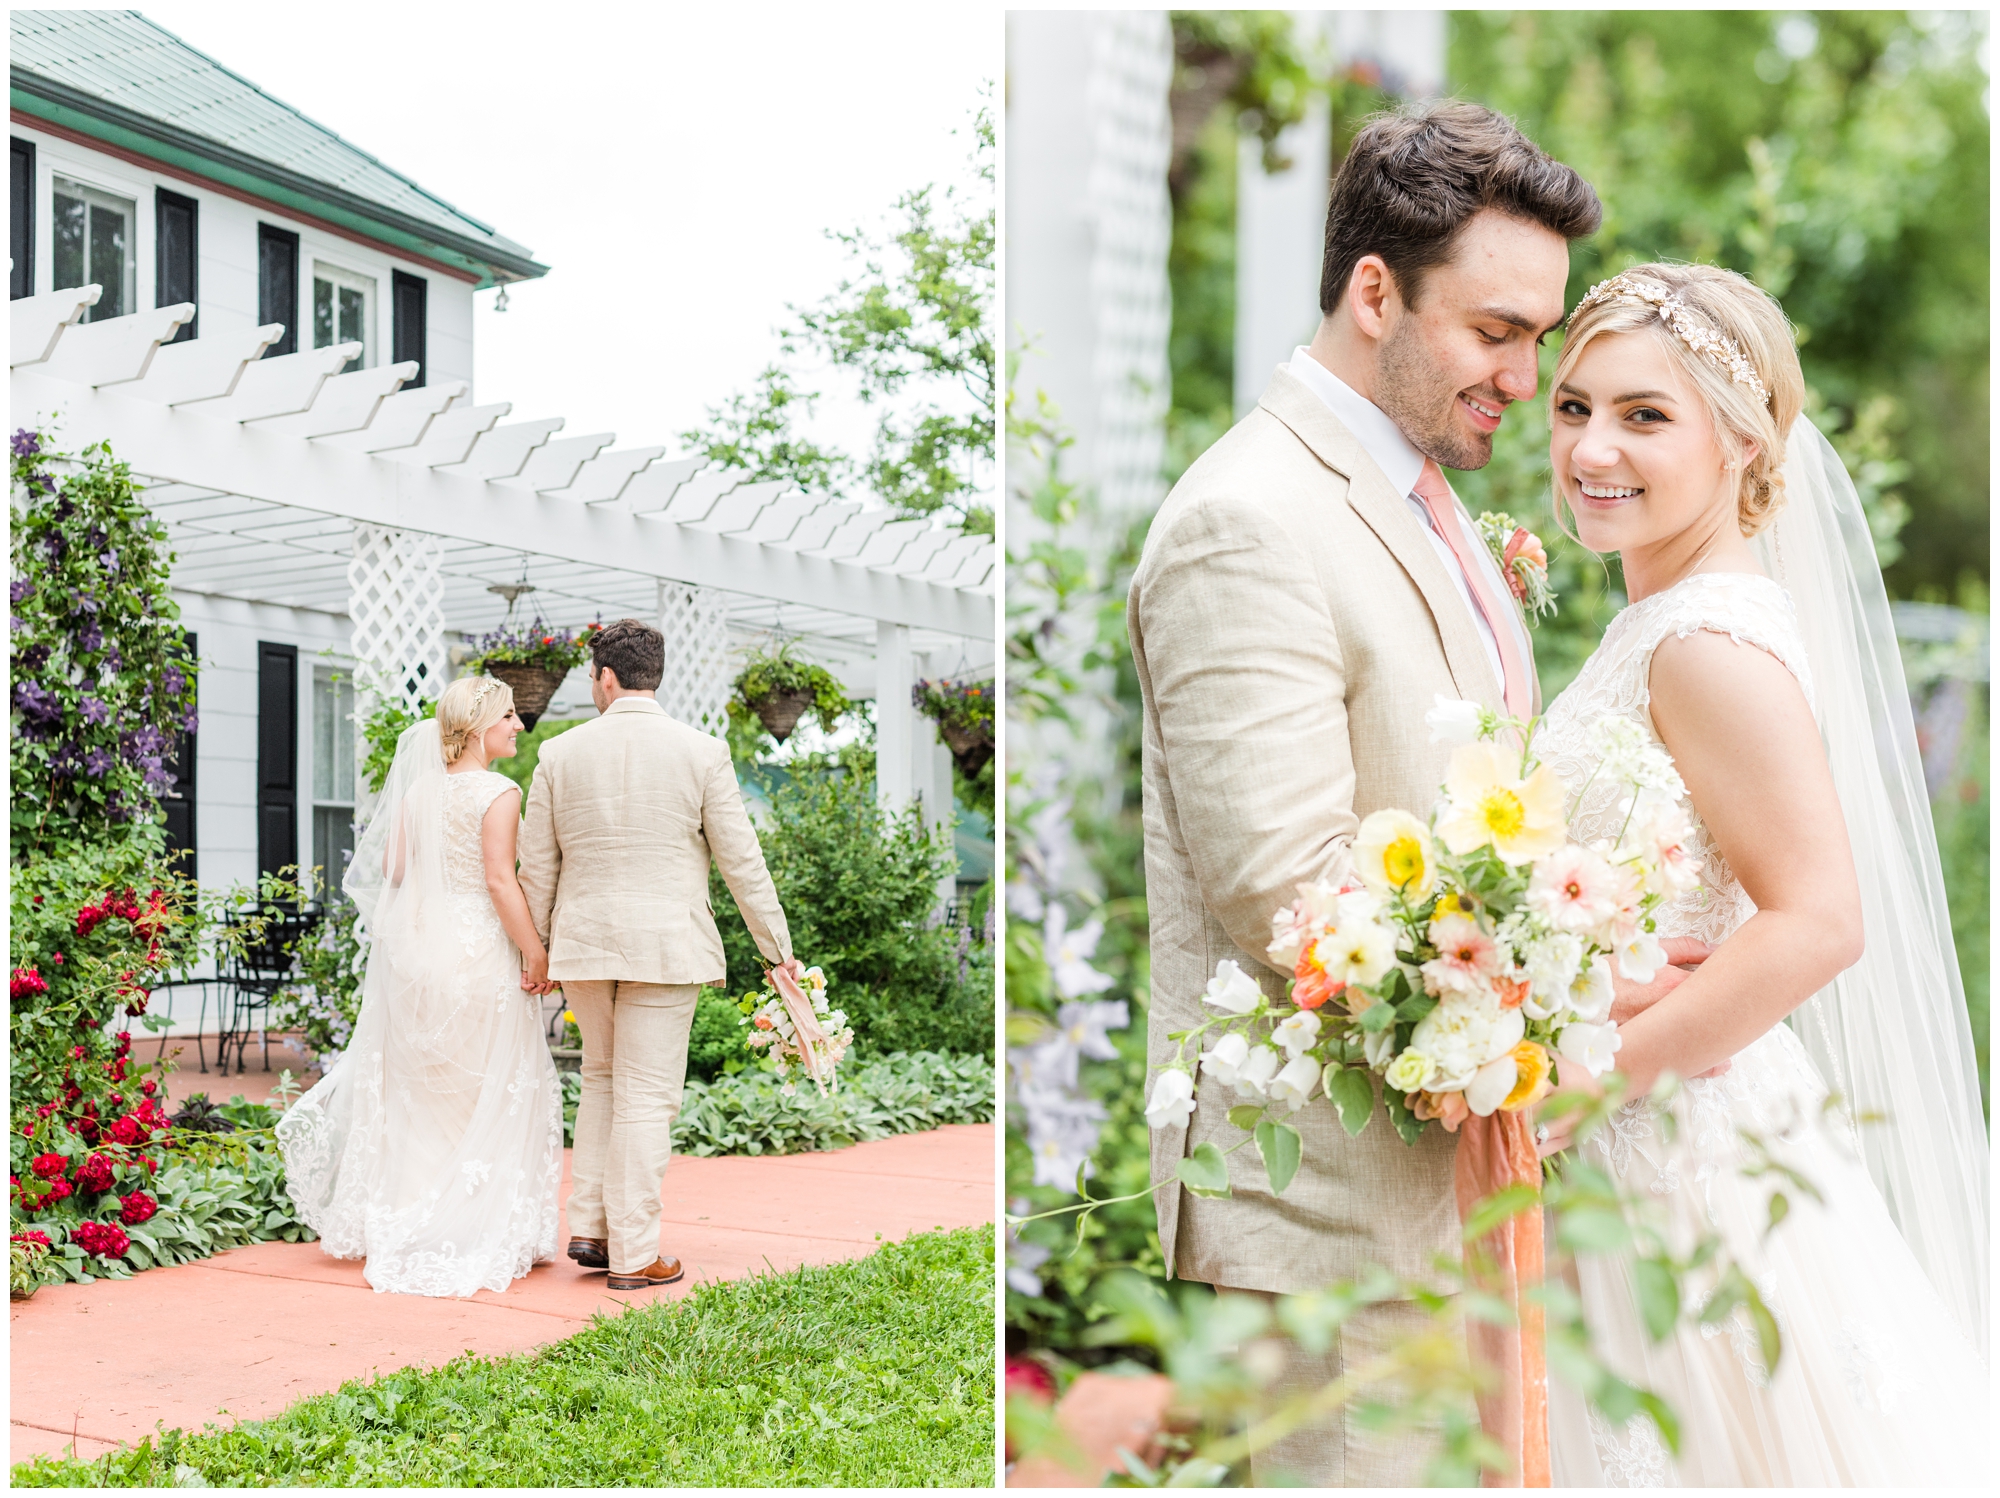 The bride and groom walk in front of the porch at defiance vineyard. In the second photo, the groom looks at the bride, who is smiling at the camera. 